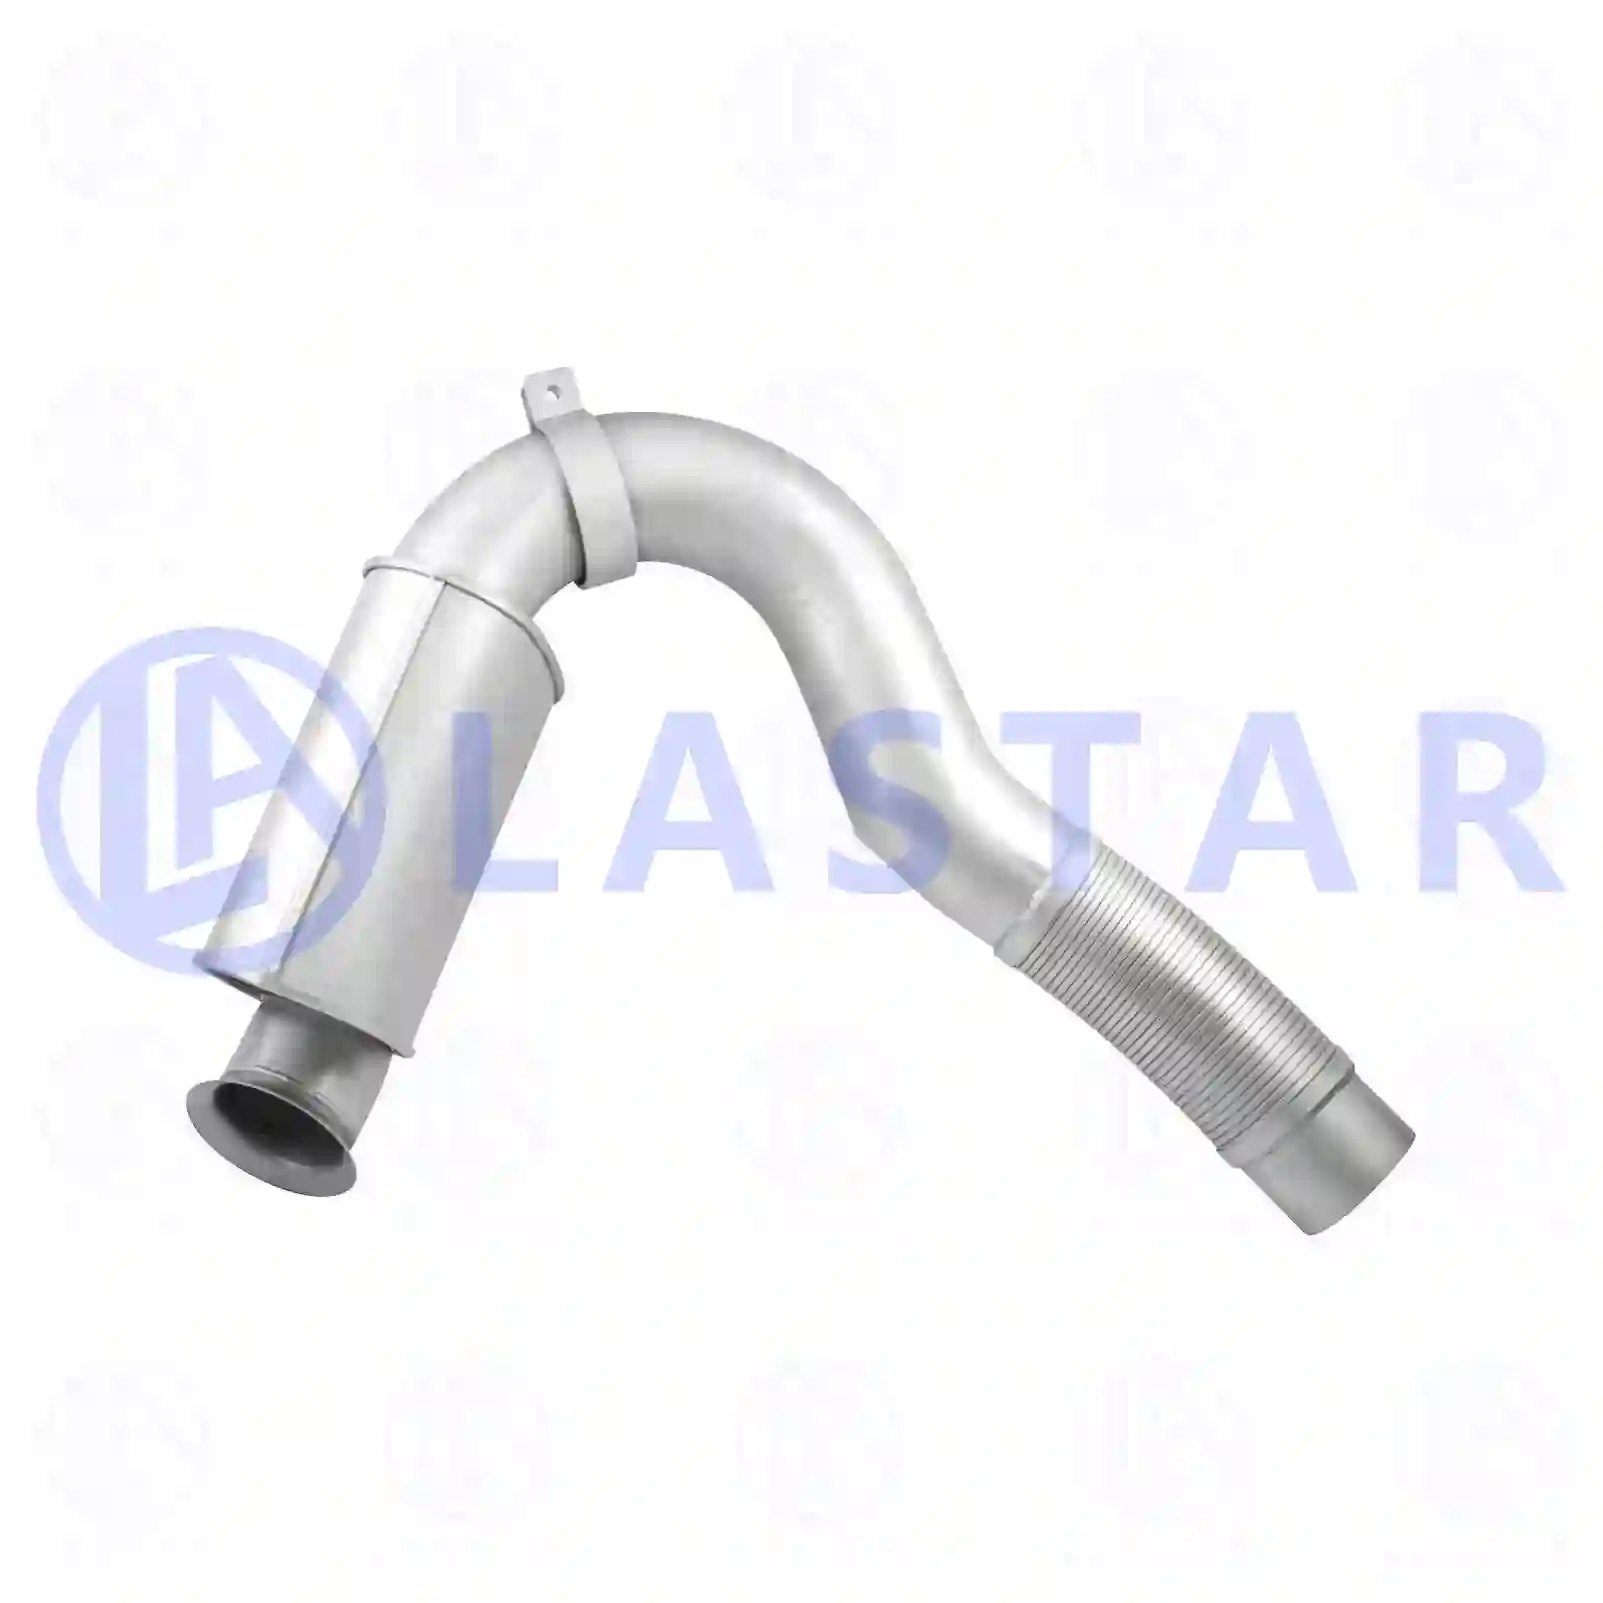 Exhaust pipe, 77706336, 9414900419 ||  77706336 Lastar Spare Part | Truck Spare Parts, Auotomotive Spare Parts Exhaust pipe, 77706336, 9414900419 ||  77706336 Lastar Spare Part | Truck Spare Parts, Auotomotive Spare Parts